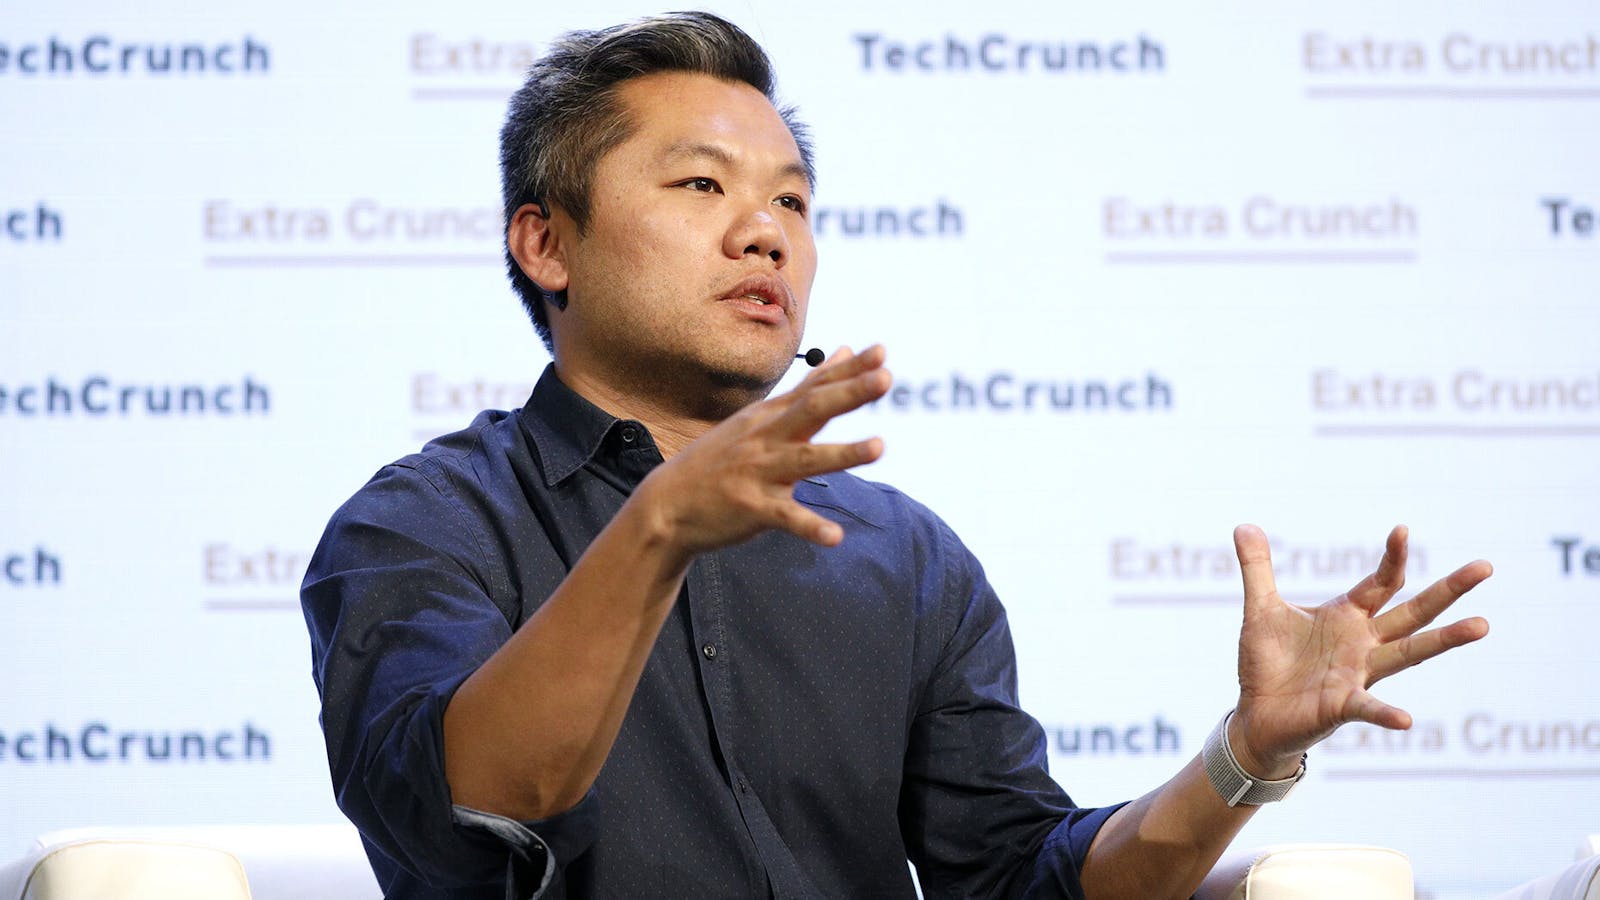 Andreessen Horowitz General Partner Andrew Chen. He led the Clubhouse investment. Photo: Getty Images